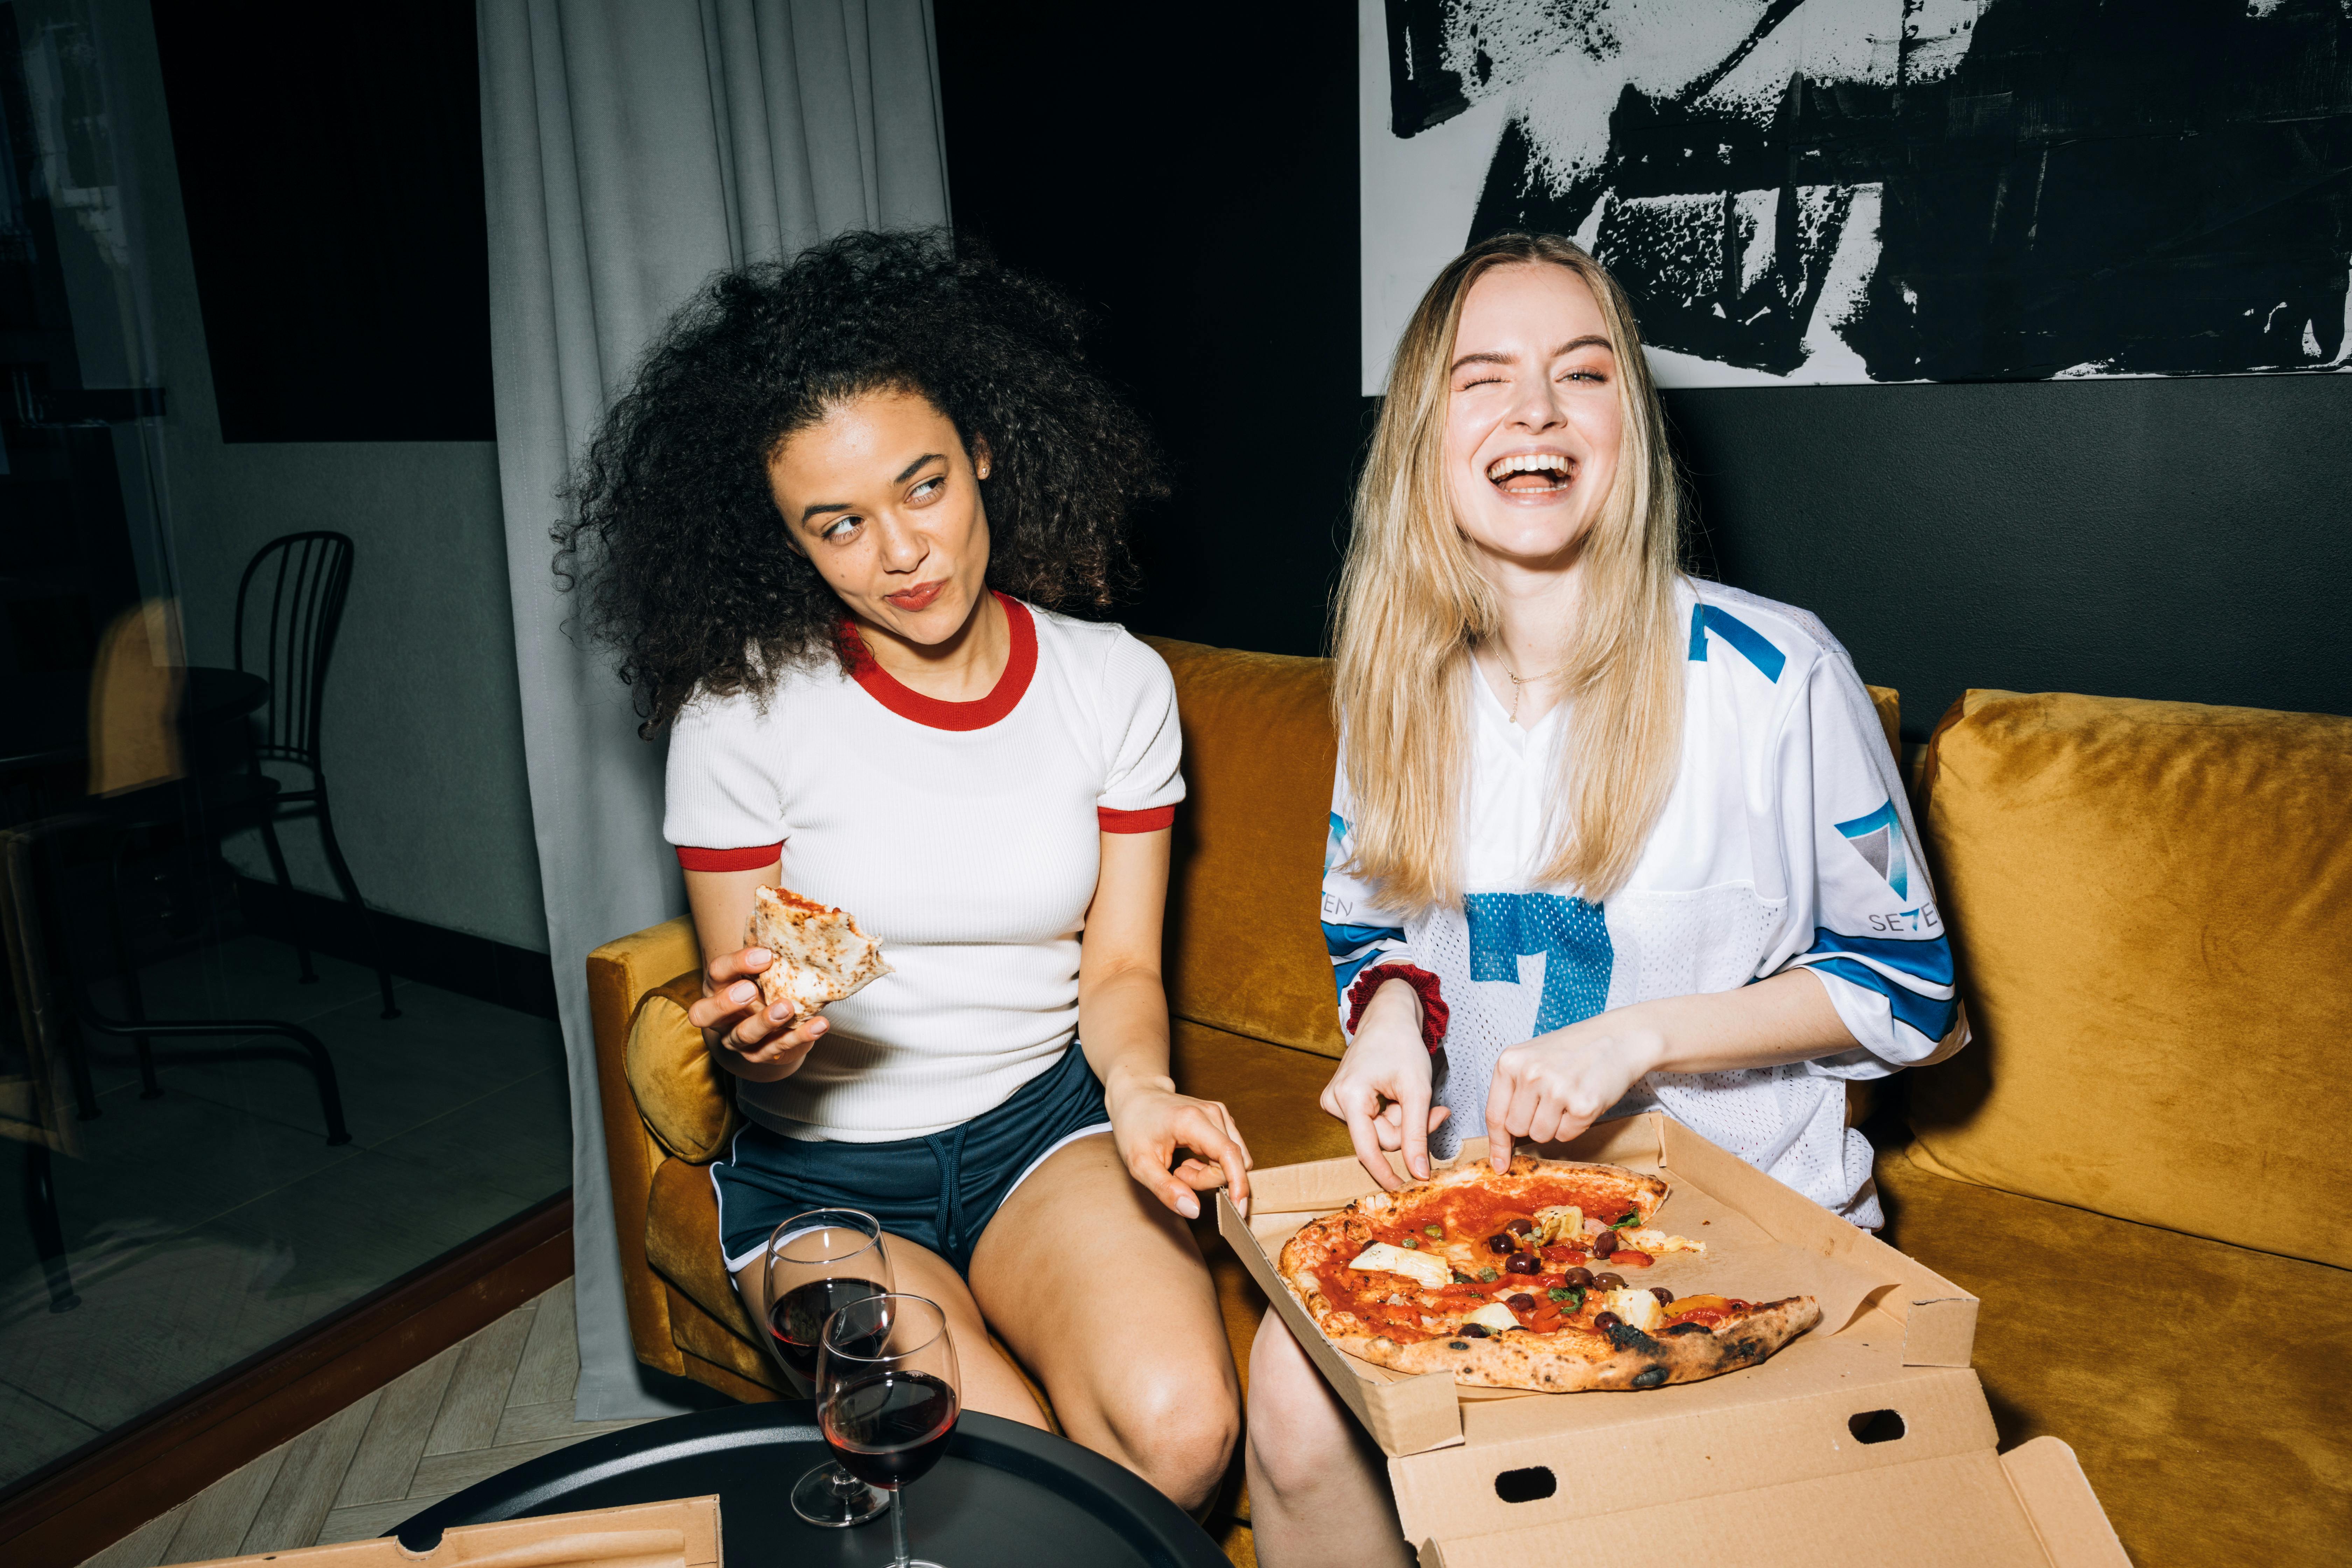 John's grandkids throwing a pizza party for him | Source: Pexels